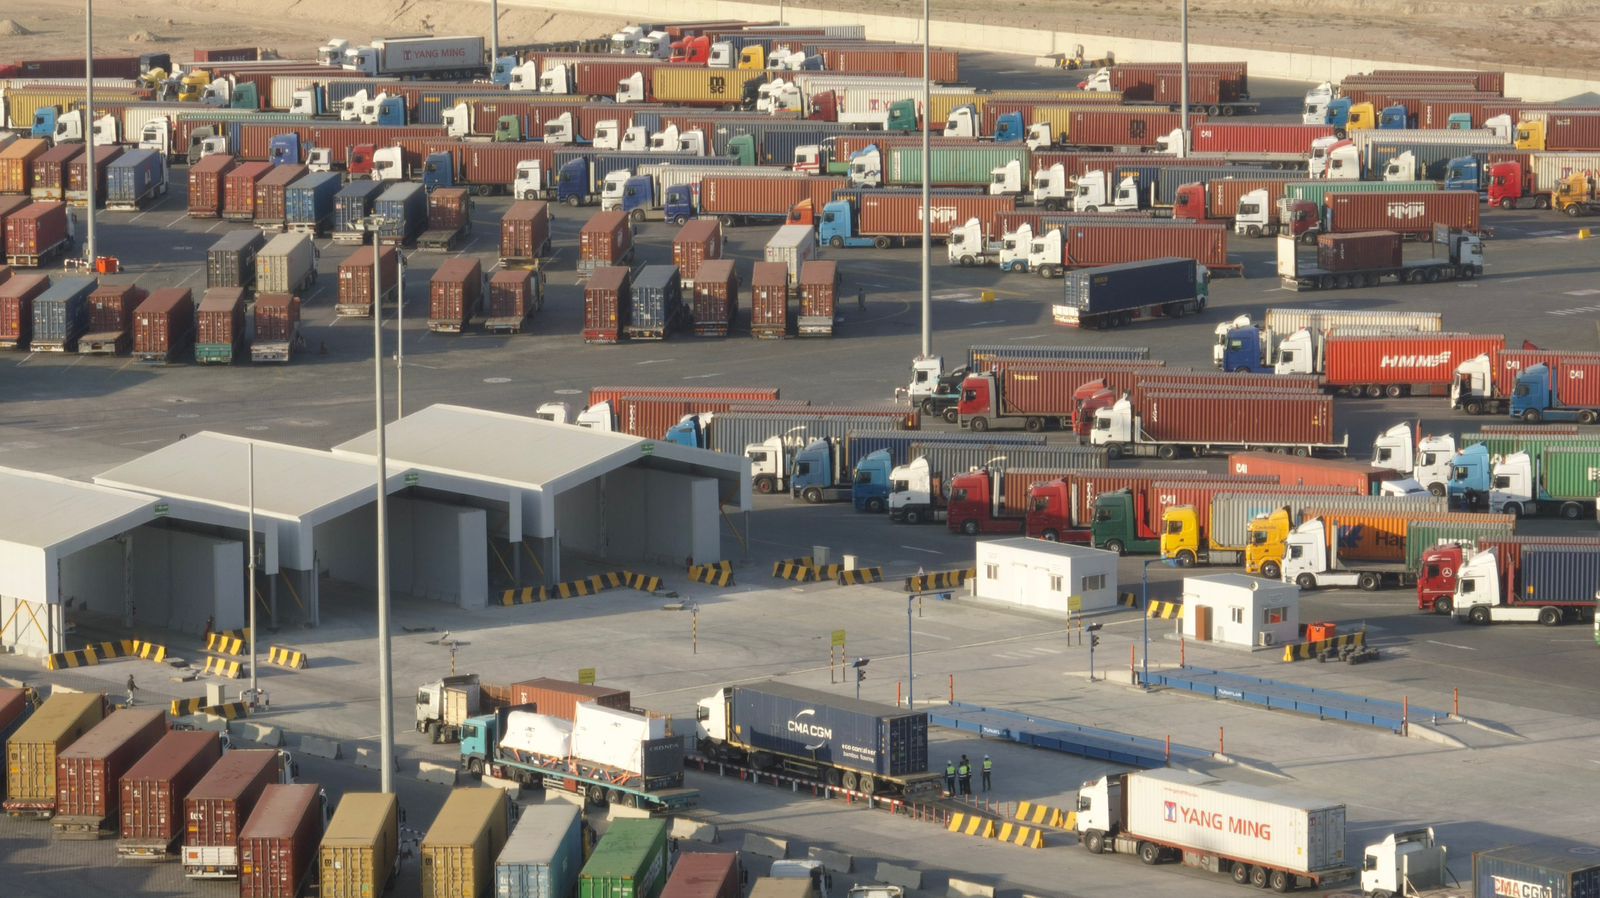 Iraqi ports emerge as key transit points amidst international shipping route changes